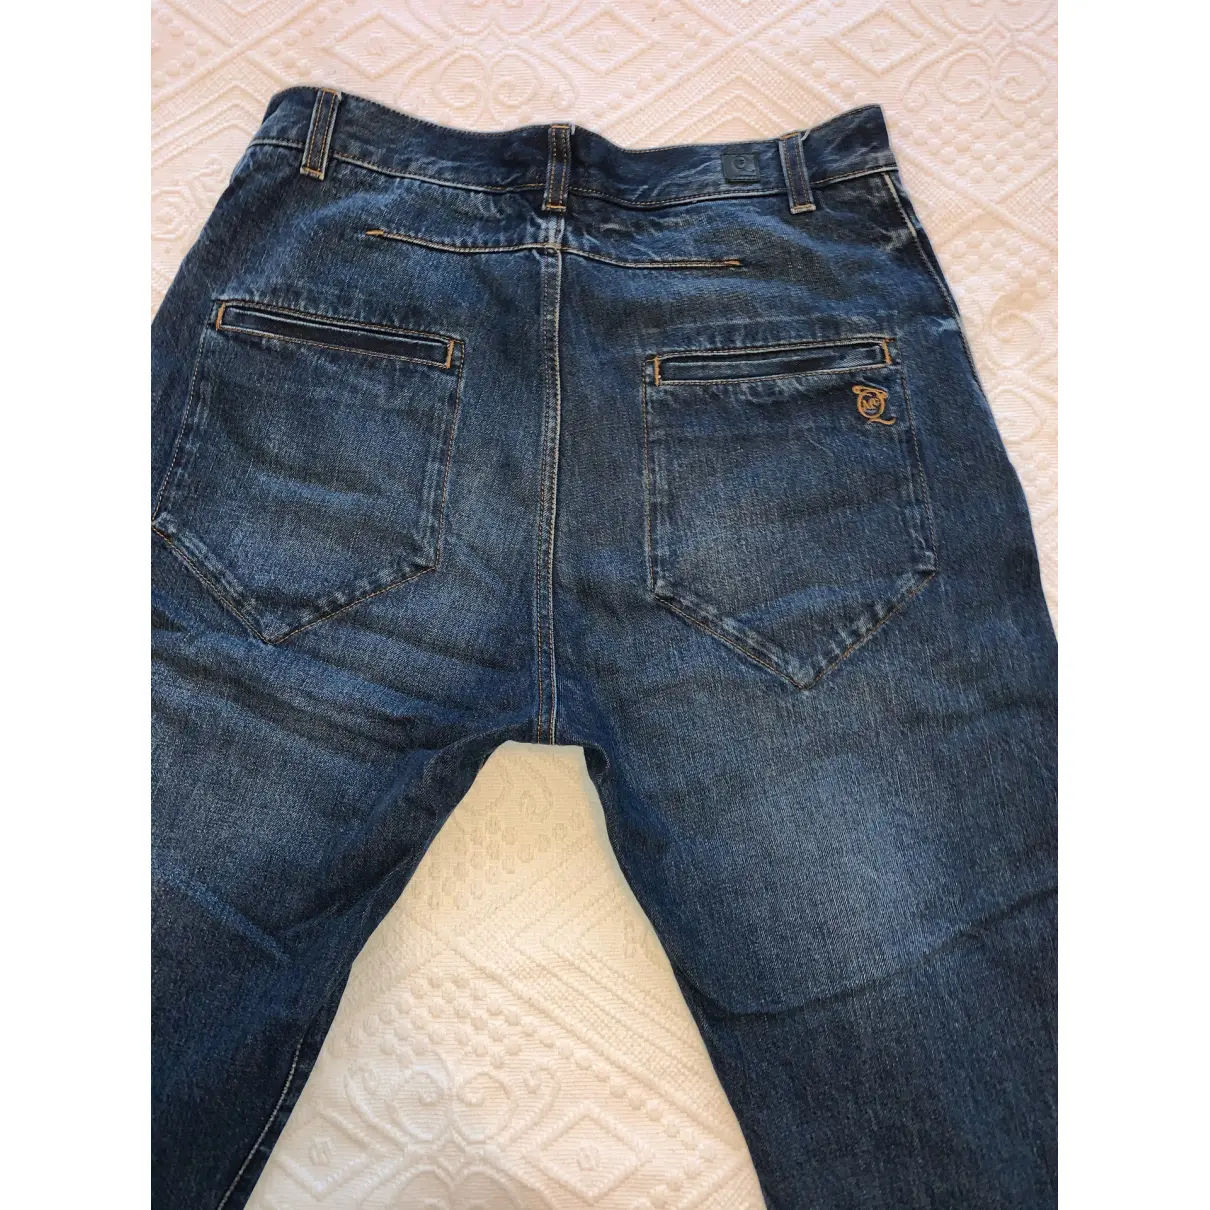 Buy Mcq Straight jeans online